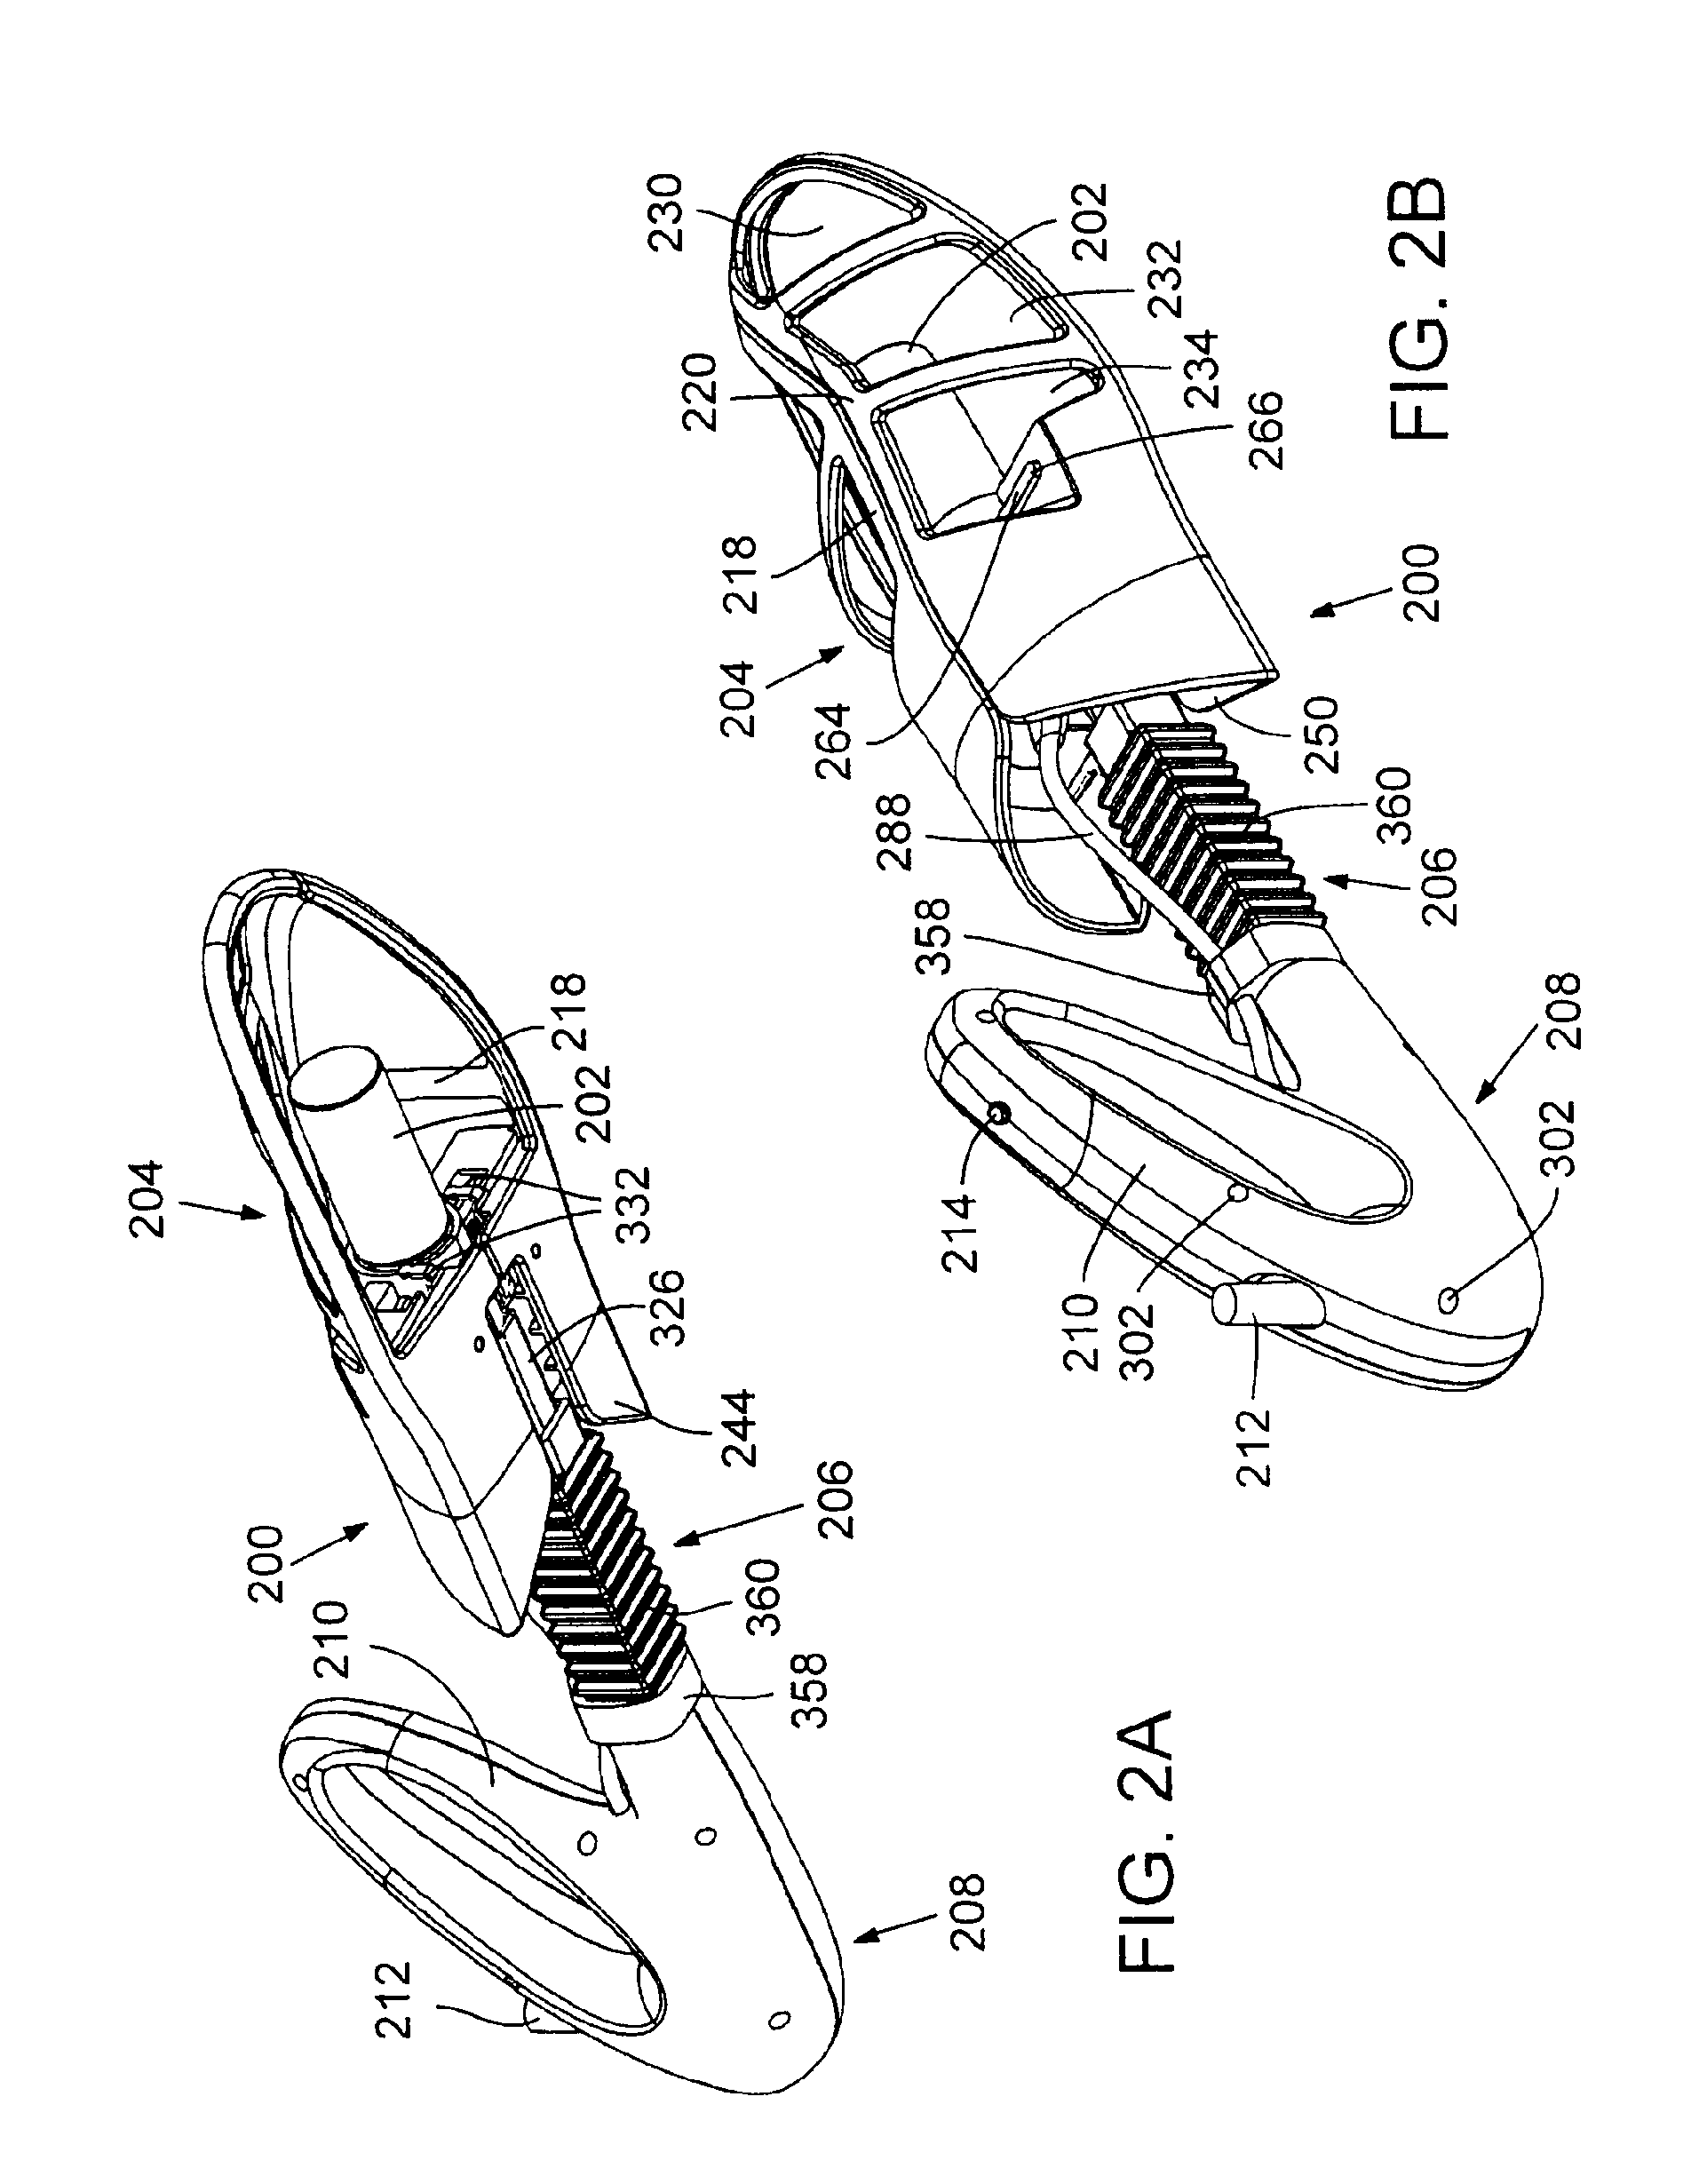 Integrated footwear sanitizing and deodorizing system